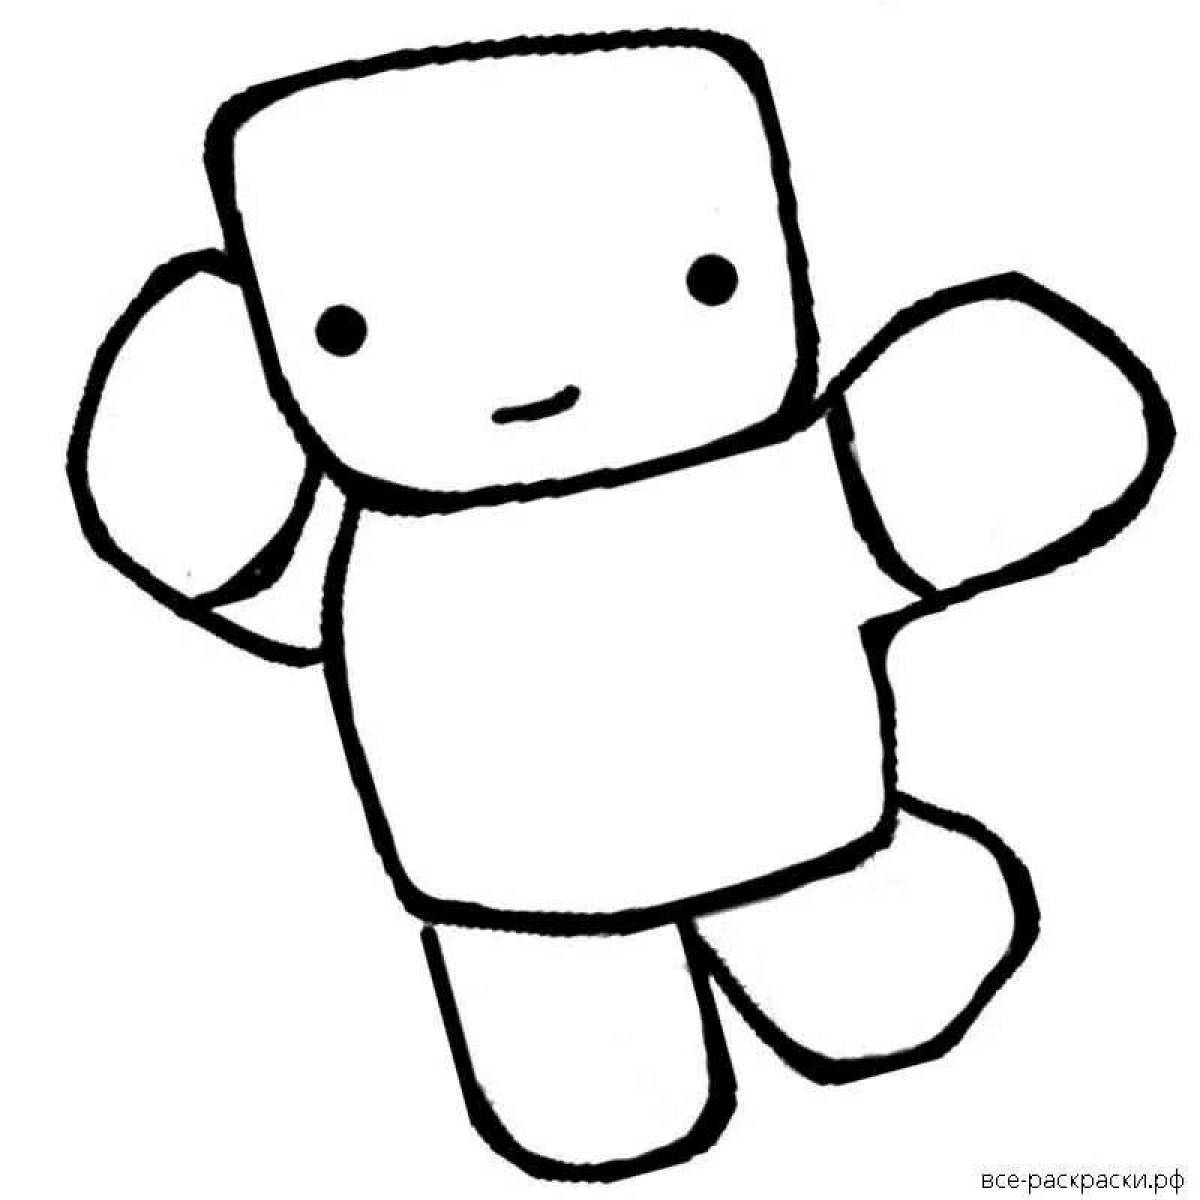 Roblox animated face coloring page